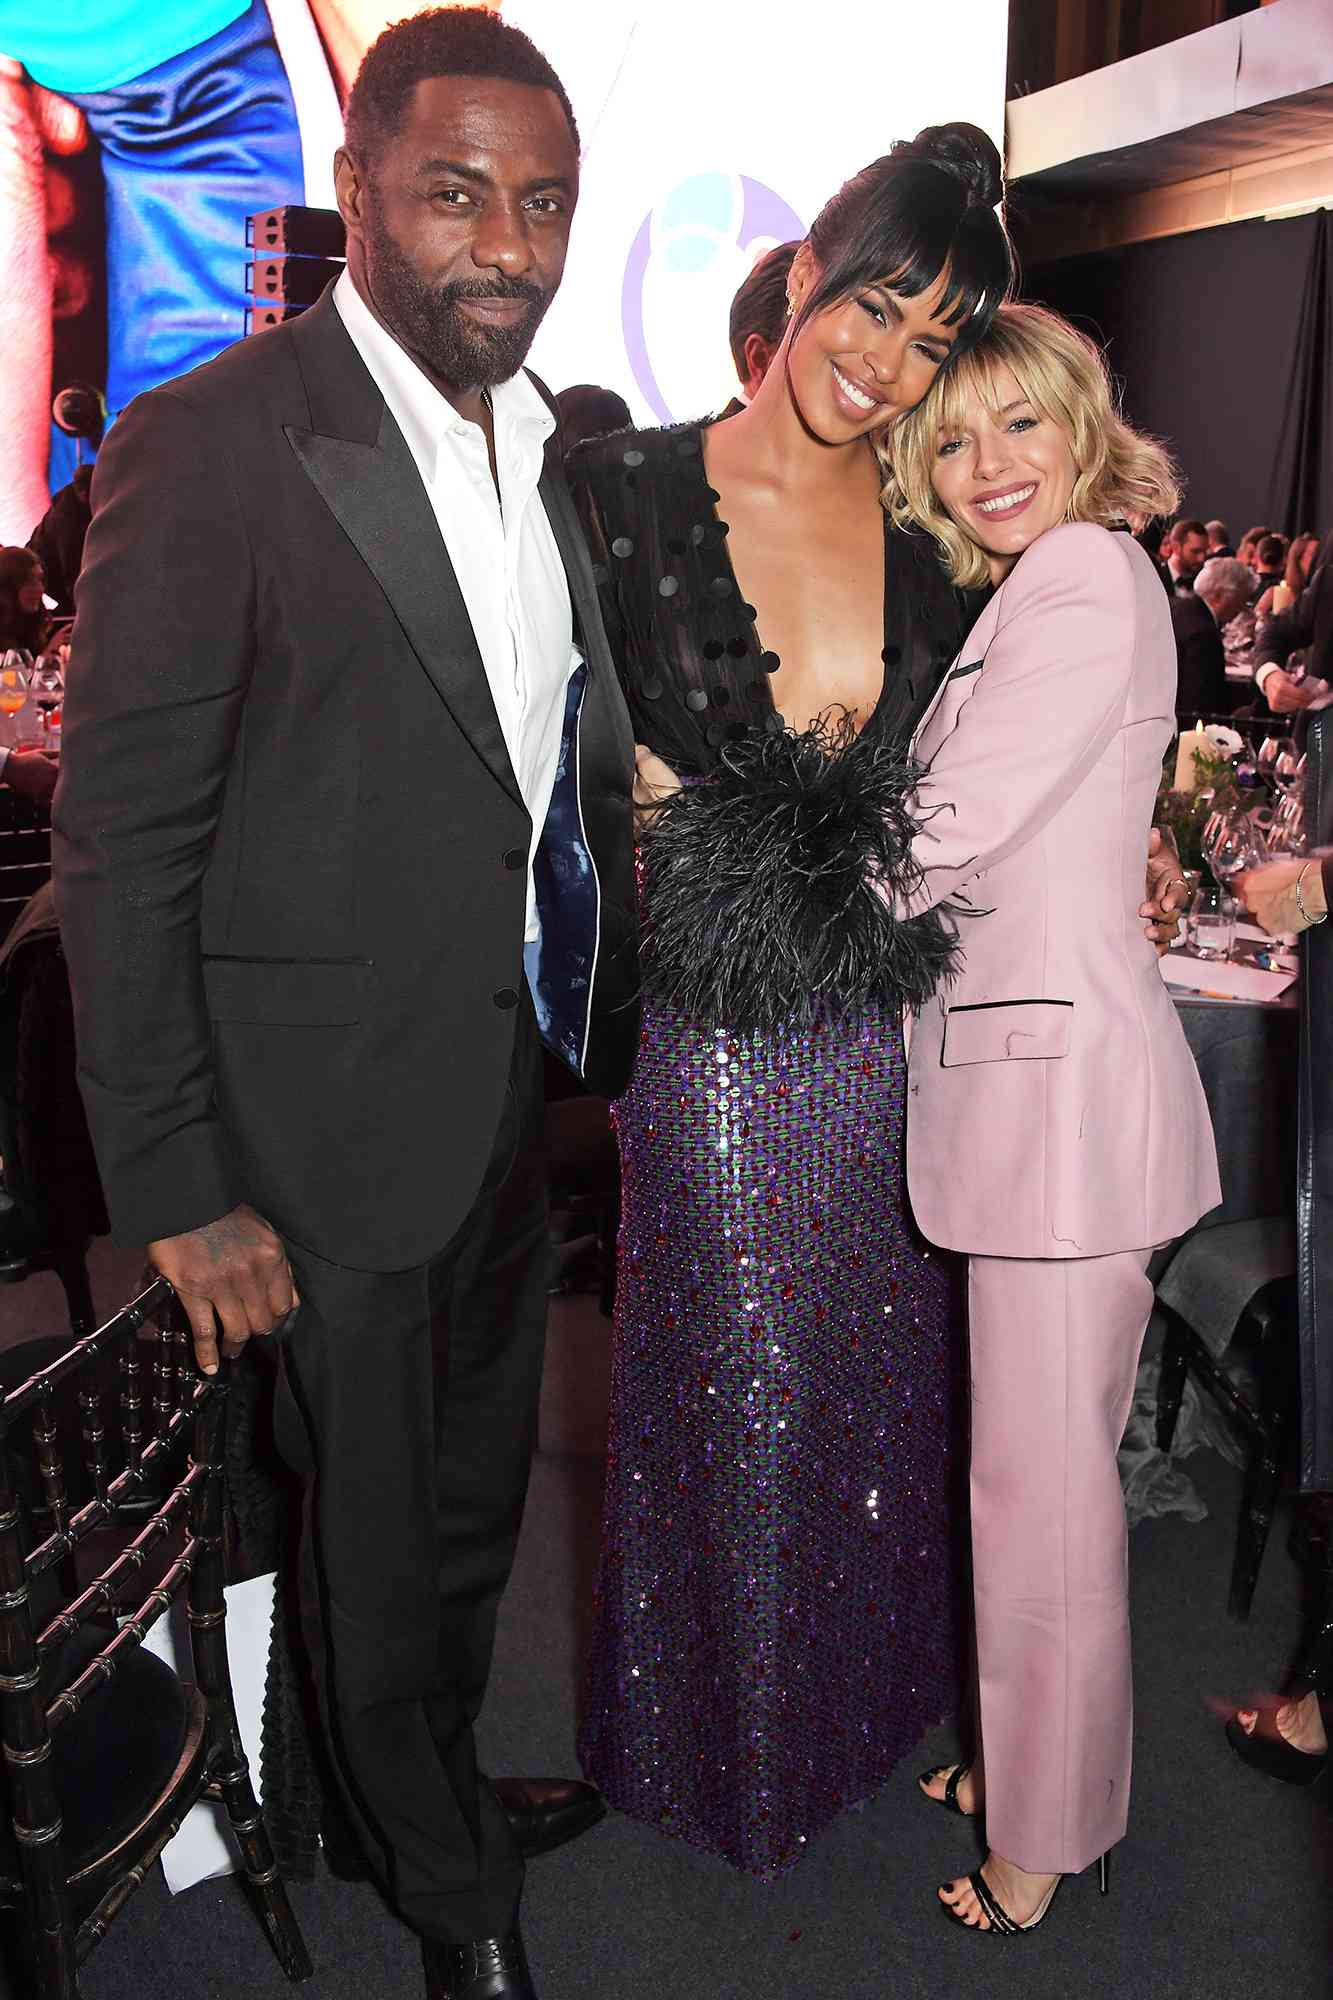 LONDON, ENGLAND - DECEMBER 01: (L to R) Idris Elba, Sabrina Dhowre Elba and Sienna Miller attend the mothers2mothers 20th Anniversary Gala at Outernet London on December 1, 2021 in London, England. (Photo by David M. Benett/Dave Benett/Getty Images for Gucci)